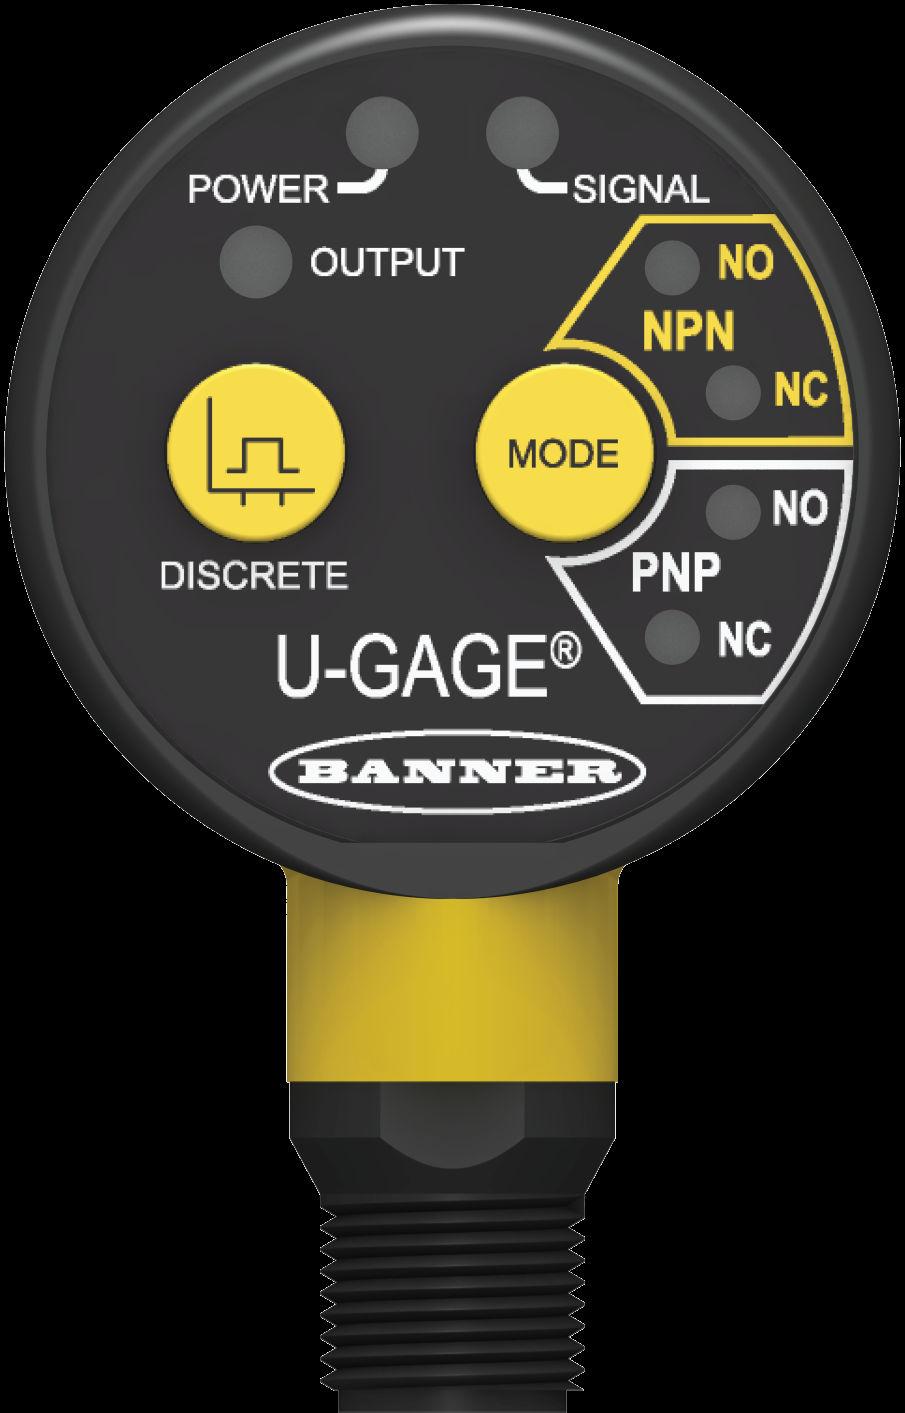 U-GAGE T3UX Series with Discrete Output Overview The U-GAGE T3UX is an easy-to-use ultrasonic sensor with extended range and built-in temperature compensation.